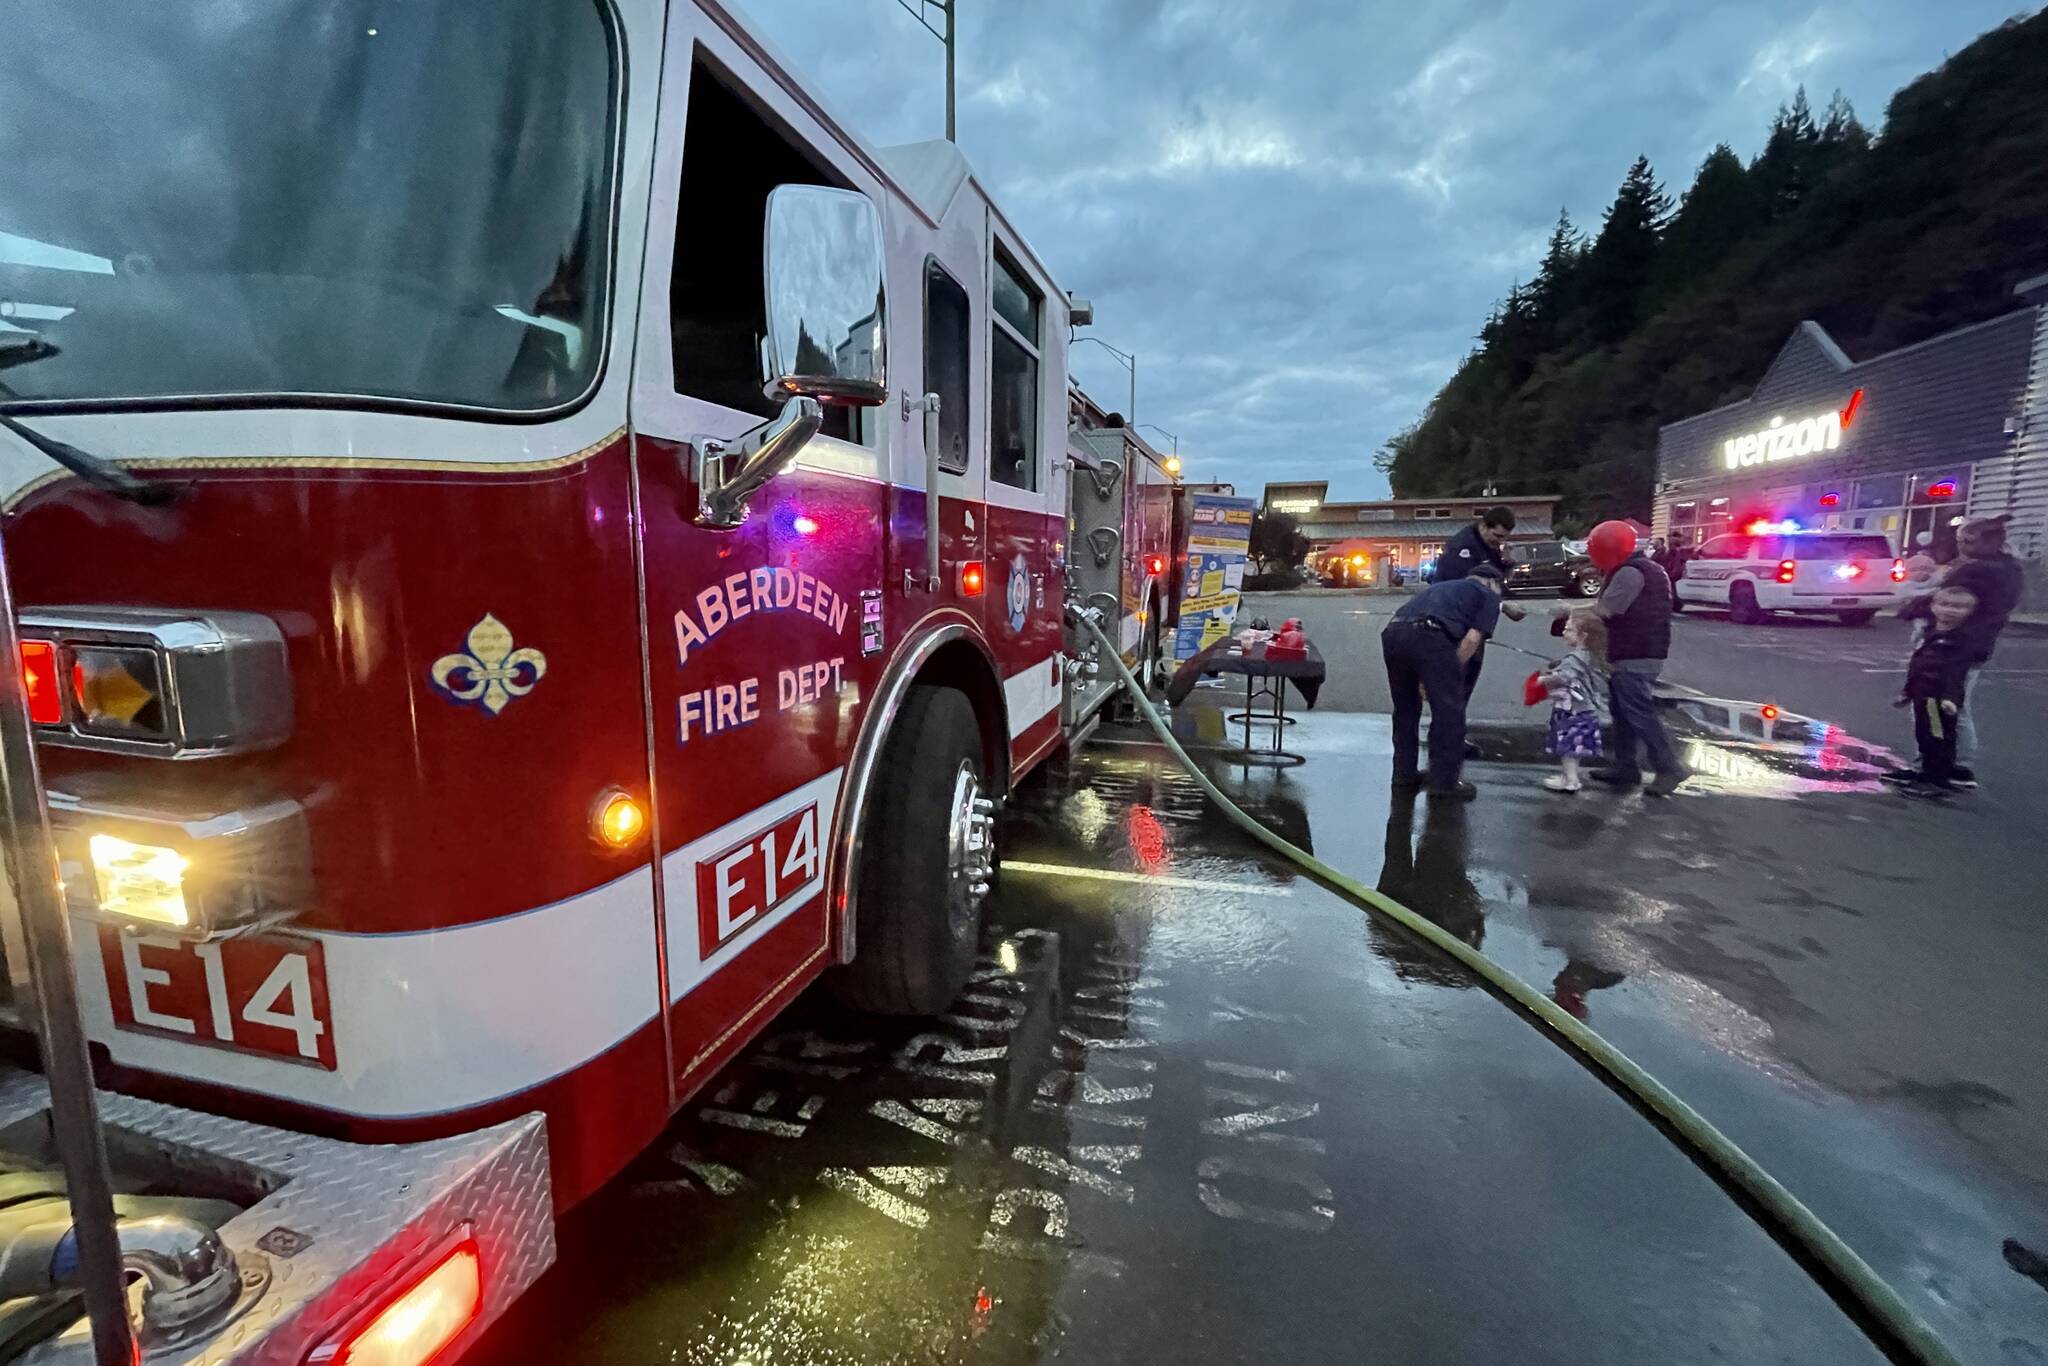 The Aberdeen Fire Department demonstrated spraying down a target at Badges & Brews, hosted at Starbucks on Sept. 22, 2022. (Michael S. Lockett / The Daily World)